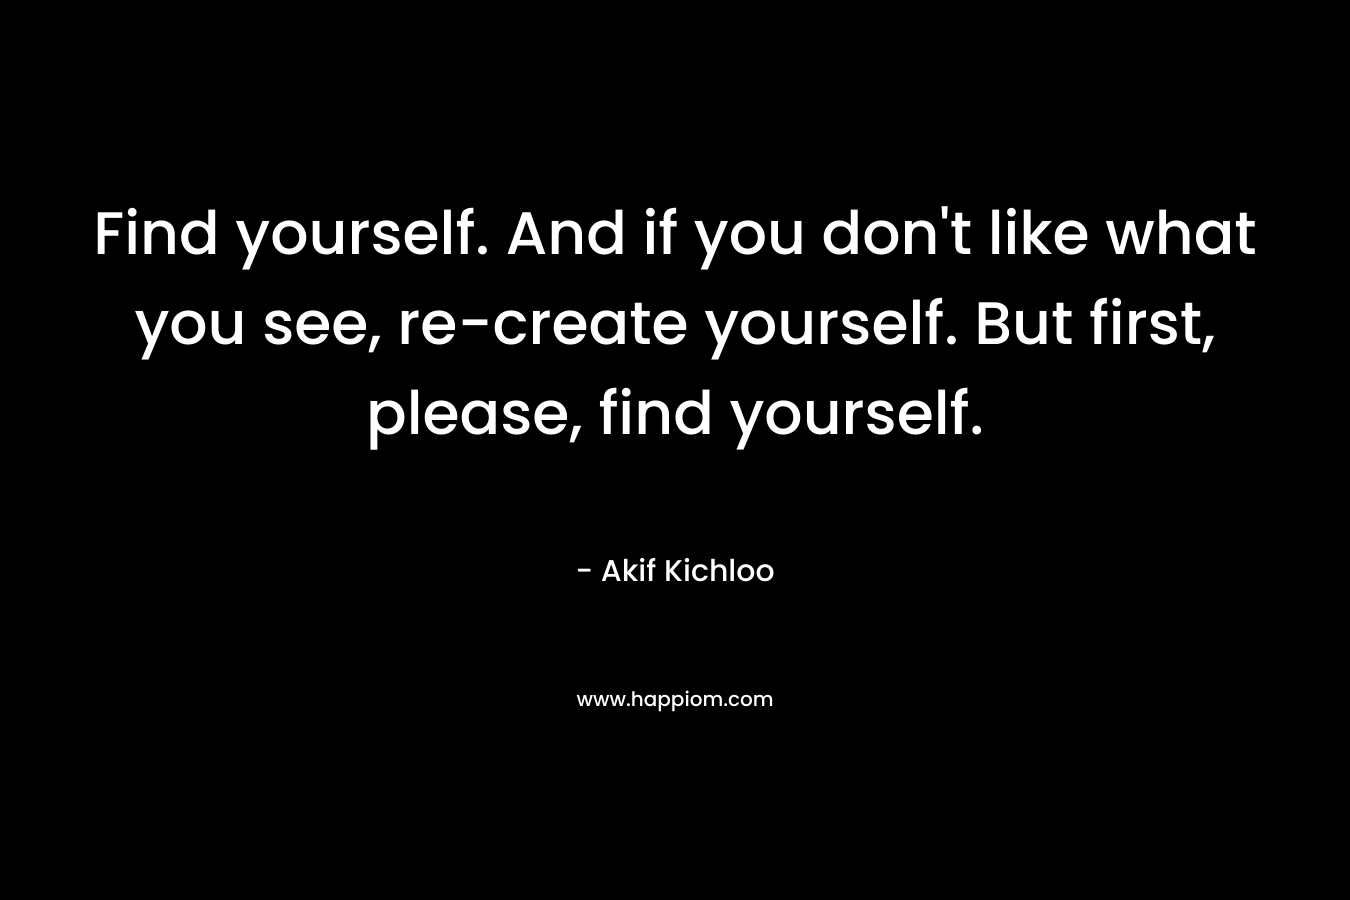 Find yourself. And if you don't like what you see, re-create yourself. But first, please, find yourself.